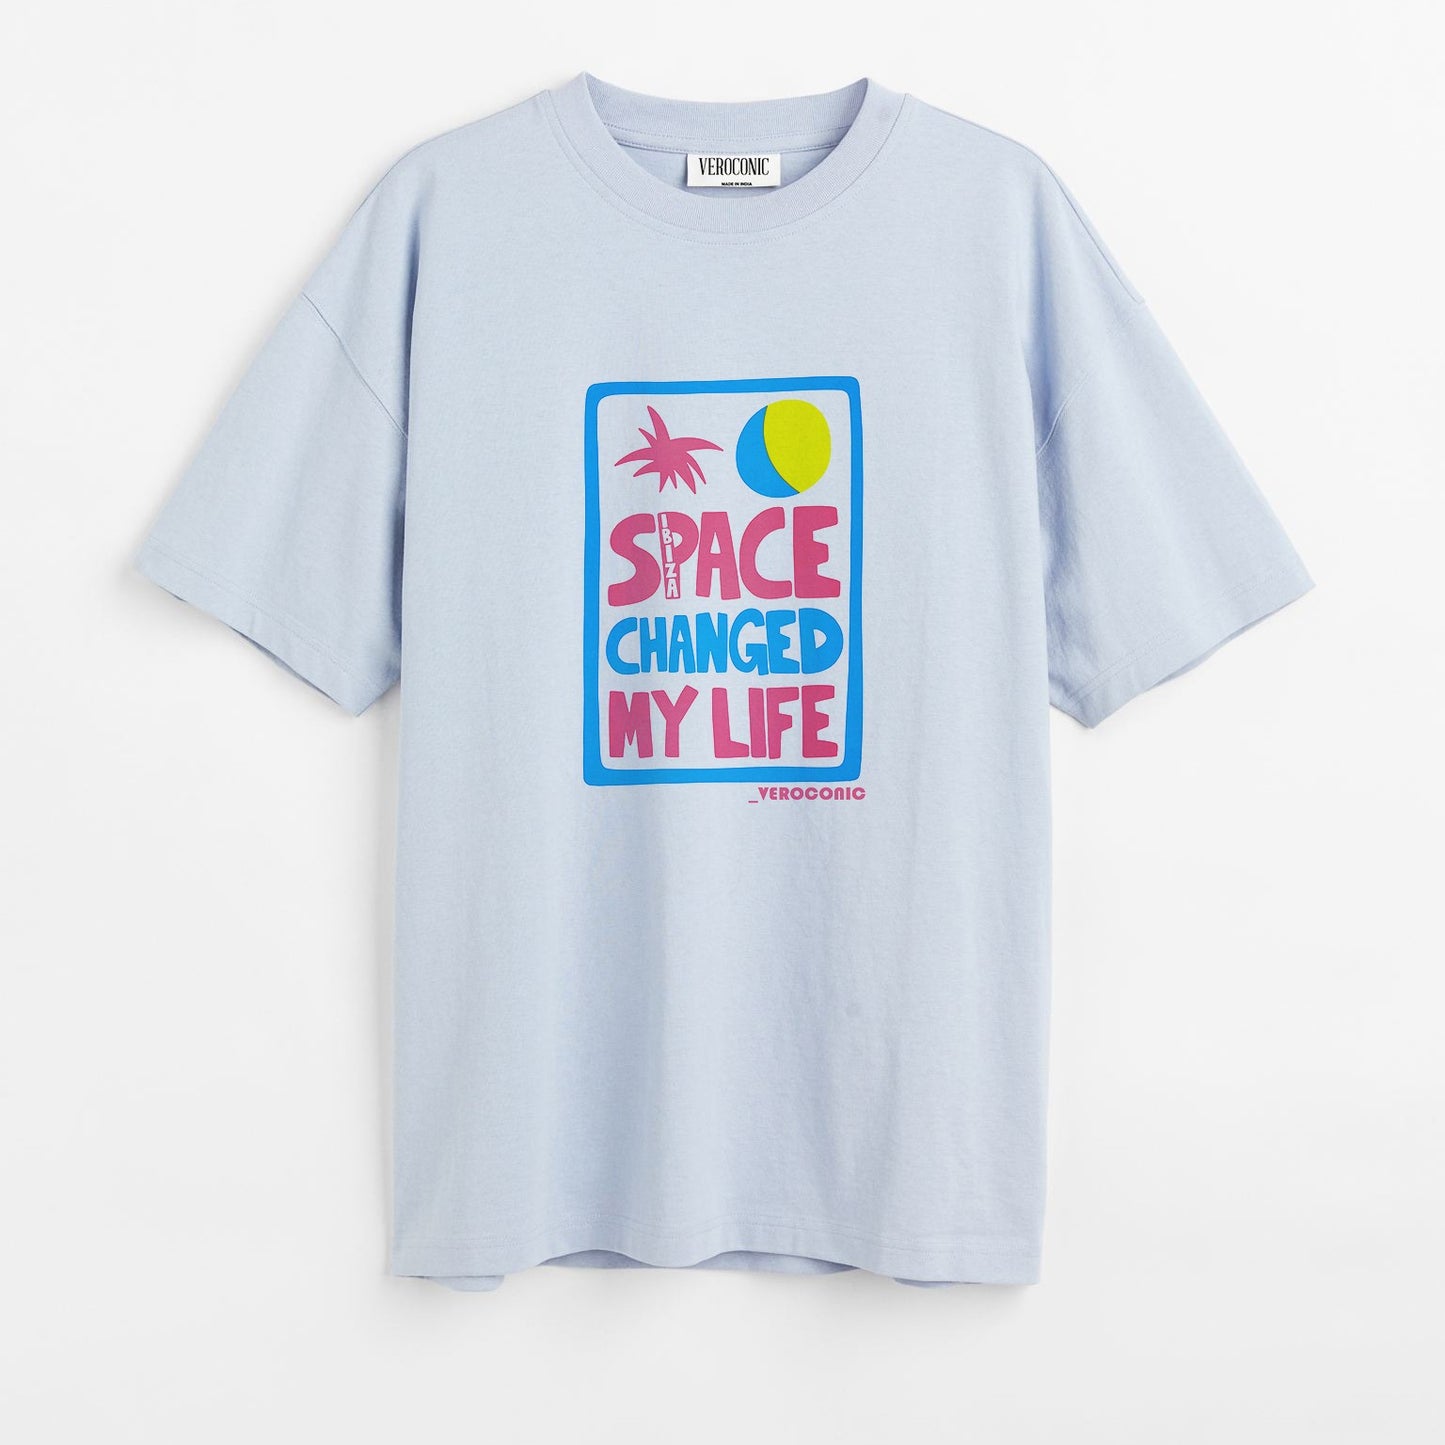 Space Changed My Life Graphic Printed Oversized Baby Blue Cotton T-shirt